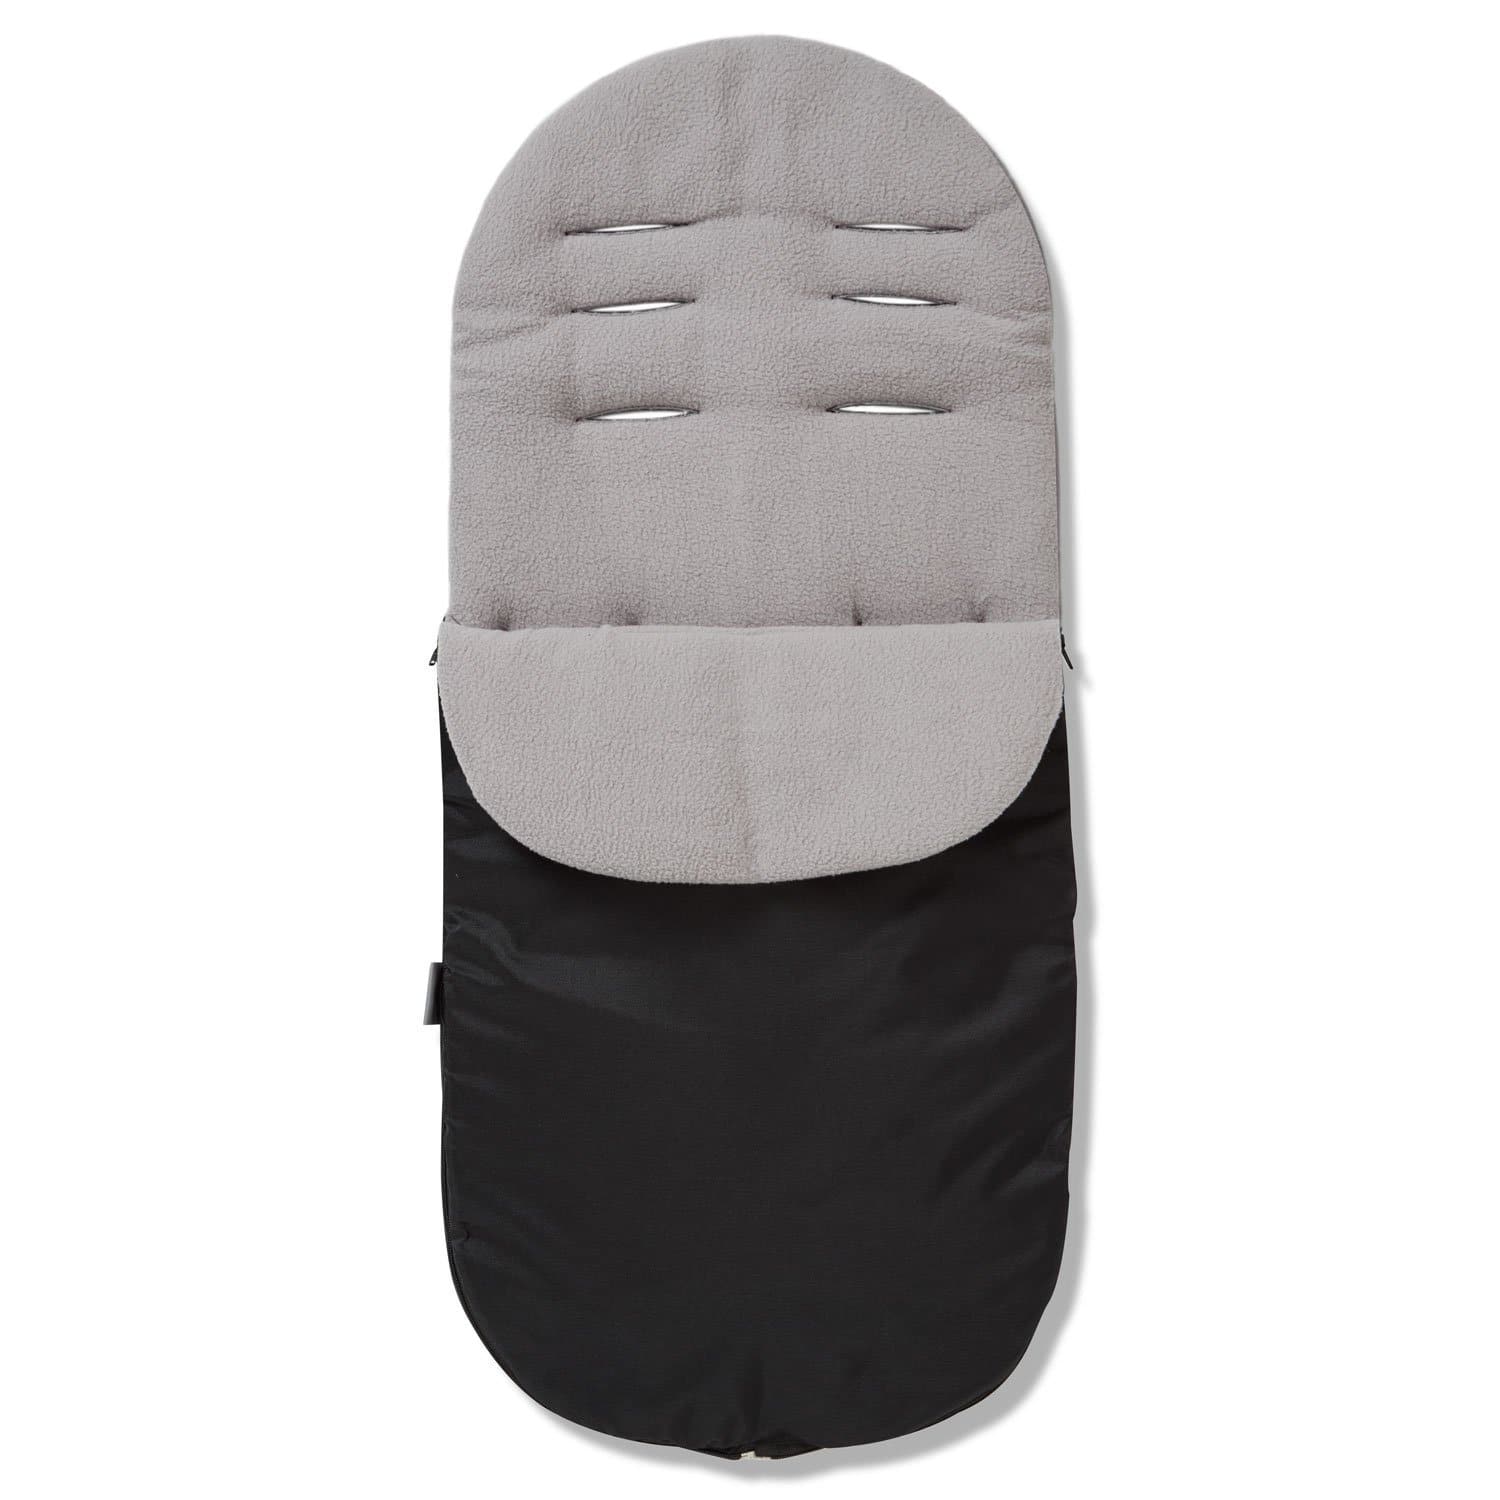 Footmuff / Cosy Toes Compatible with NeoNato - Grey / Fits All Models | For Your Little One